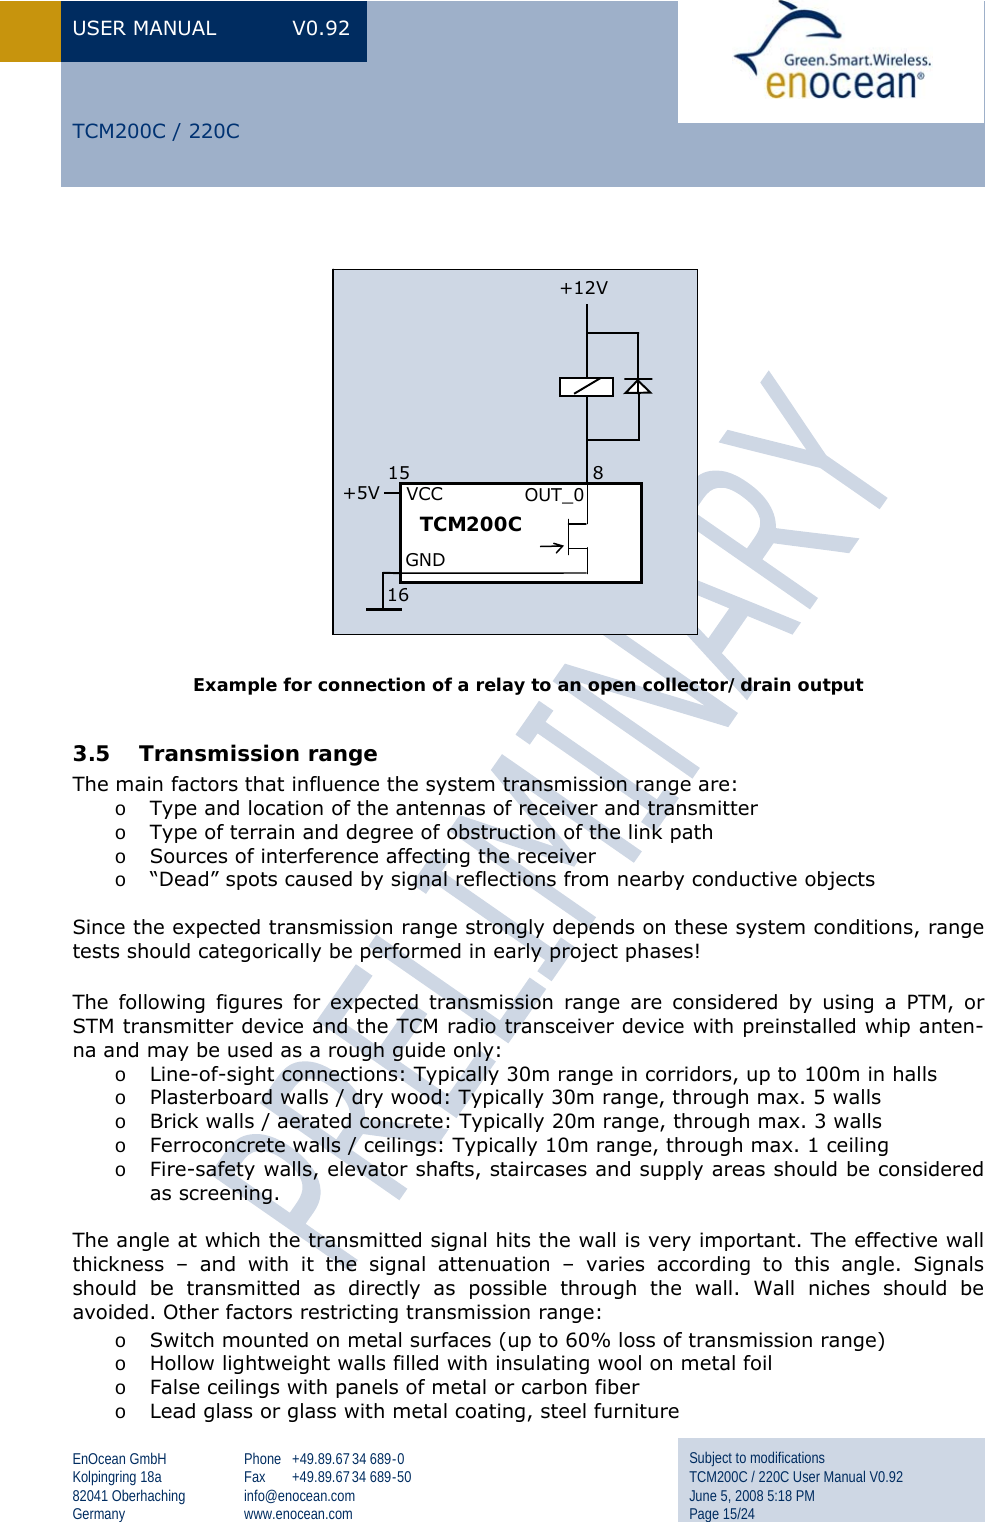 USER MANUAL  V0.92 EnOcean GmbH Kolpingring 18a 82041 Oberhaching Germany Phone +49.89.67 34 689-0 Fax +49.89.67 34 689-50 info@enocean.com www.enocean.com Subject to modifications TCM200C / 220C User Manual V0.92 June 5, 2008 5:18 PM Page 15/24  TCM200C / 220C              Example for connection of a relay to an open collector/drain output  3.5 Transmission range The main factors that influence the system transmission range are: o Type and location of the antennas of receiver and transmitter o Type of terrain and degree of obstruction of the link path o Sources of interference affecting the receiver o “Dead” spots caused by signal reflections from nearby conductive objects  Since the expected transmission range strongly depends on these system conditions, range tests should categorically be performed in early project phases! The following figures for expected transmission range are considered by using a PTM, or STM transmitter device and the TCM radio transceiver device with preinstalled whip anten-na and may be used as a rough guide only: o Line-of-sight connections: Typically 30m range in corridors, up to 100m in halls o Plasterboard walls / dry wood: Typically 30m range, through max. 5 walls o Brick walls / aerated concrete: Typically 20m range, through max. 3 walls o Ferroconcrete walls / ceilings: Typically 10m range, through max. 1 ceiling o Fire-safety walls, elevator shafts, staircases and supply areas should be considered as screening.   The angle at which the transmitted signal hits the wall is very important. The effective wall thickness – and with it the signal attenuation – varies according to this angle. Signals should be transmitted as directly as possible through the wall. Wall niches should be avoided. Other factors restricting transmission range: o Switch mounted on metal surfaces (up to 60% loss of transmission range) o Hollow lightweight walls filled with insulating wool on metal foil o False ceilings with panels of metal or carbon fiber o Lead glass or glass with metal coating, steel furniture TCM200C            8 OUT_0 15    VCC GND 16 +5V +12V 